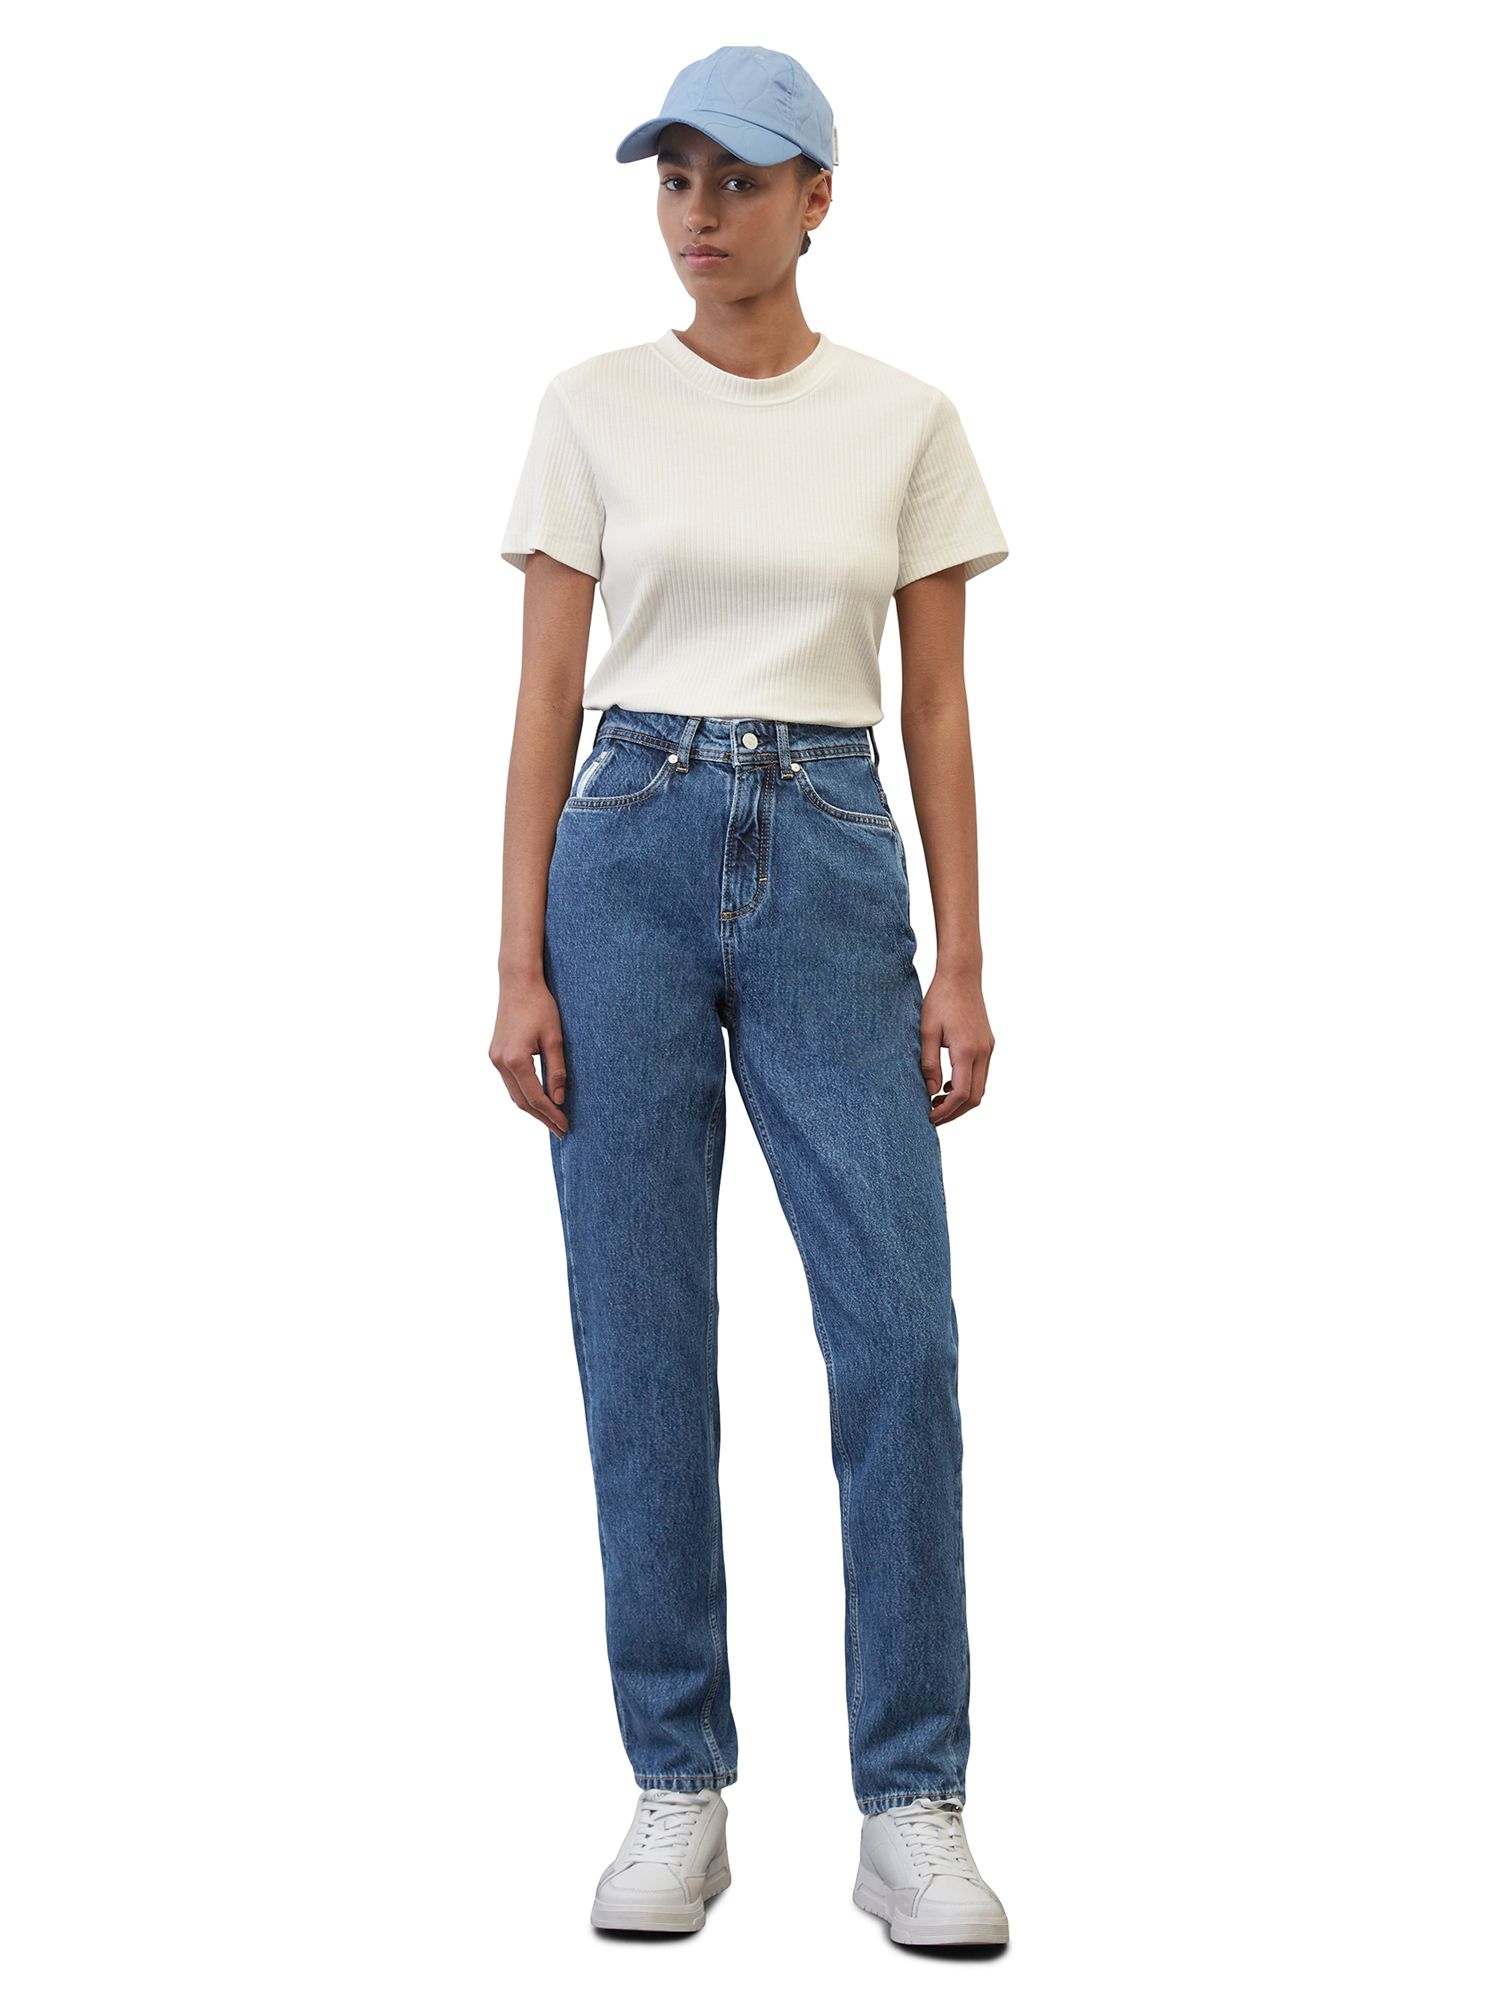 Buy Marc O'Polo Denim Maja High Rise Jeans, Mid Blue Online at johnlewis.com